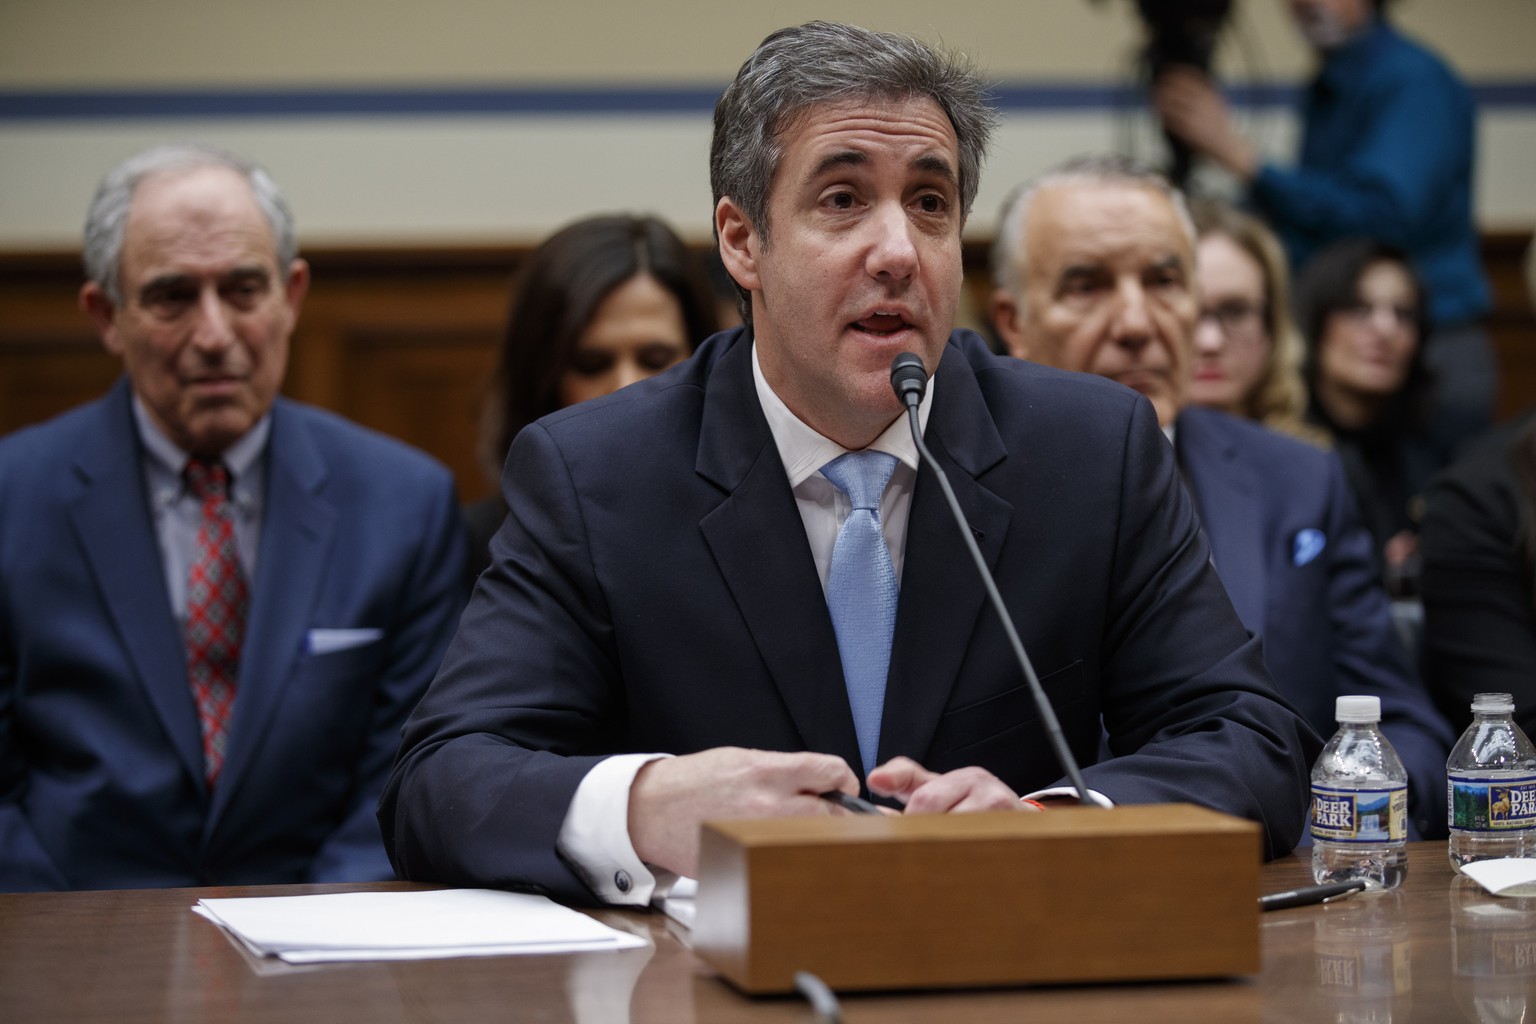 epa07402094 Michael Cohen, former attorney to US President Donald J. Trump, testifies before the House Oversight and Reform Committee in the Rayburn House Office Building in Washington, DC, USA, 27 Fe ...